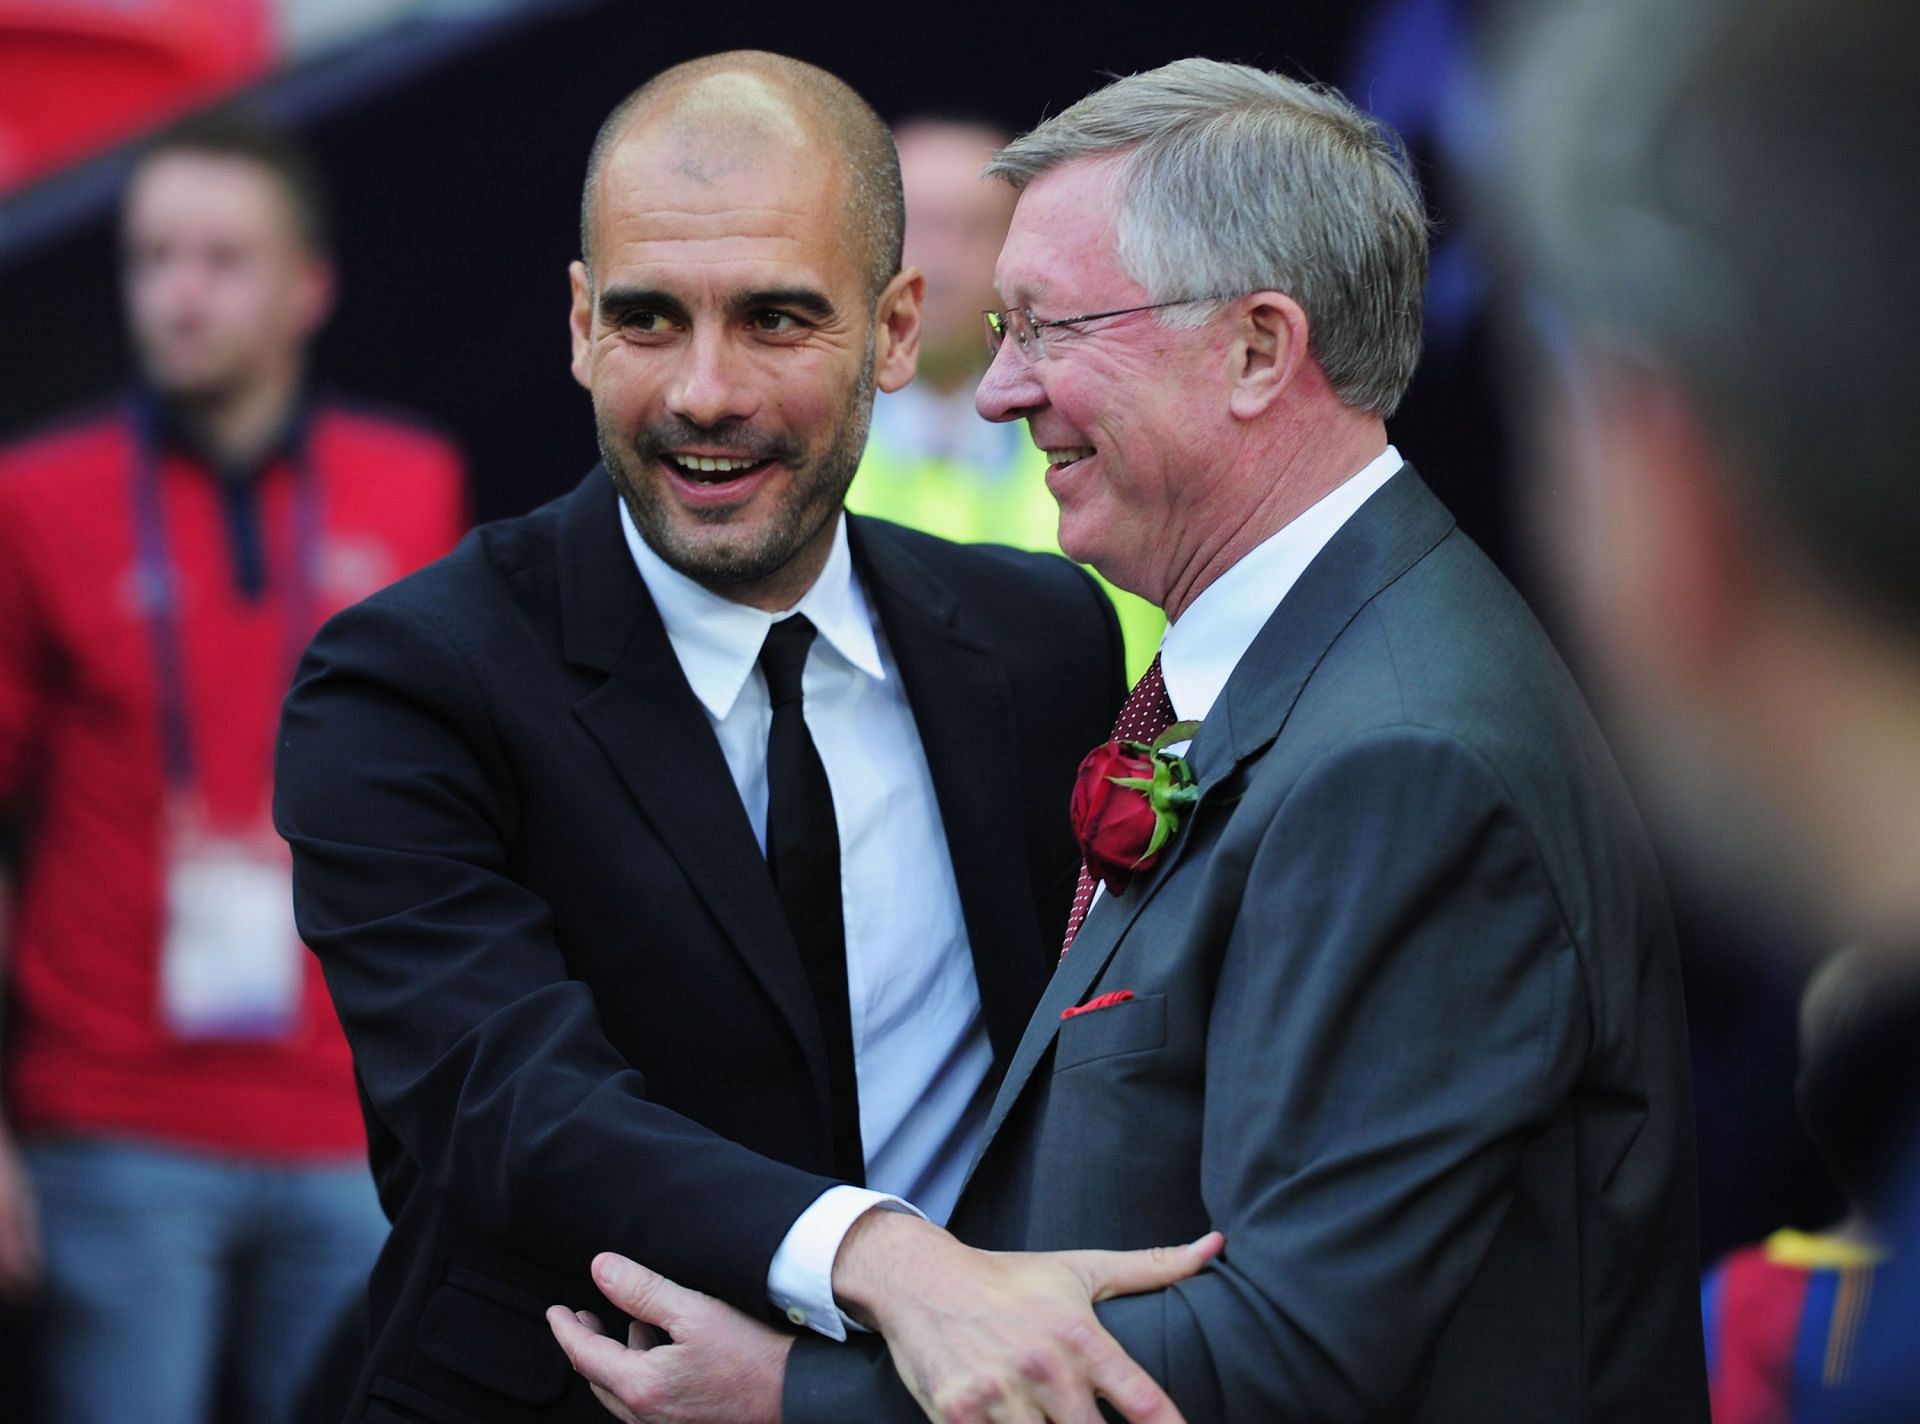 Both Pep Guardiola and Sir Alex Ferguson are world-class managers